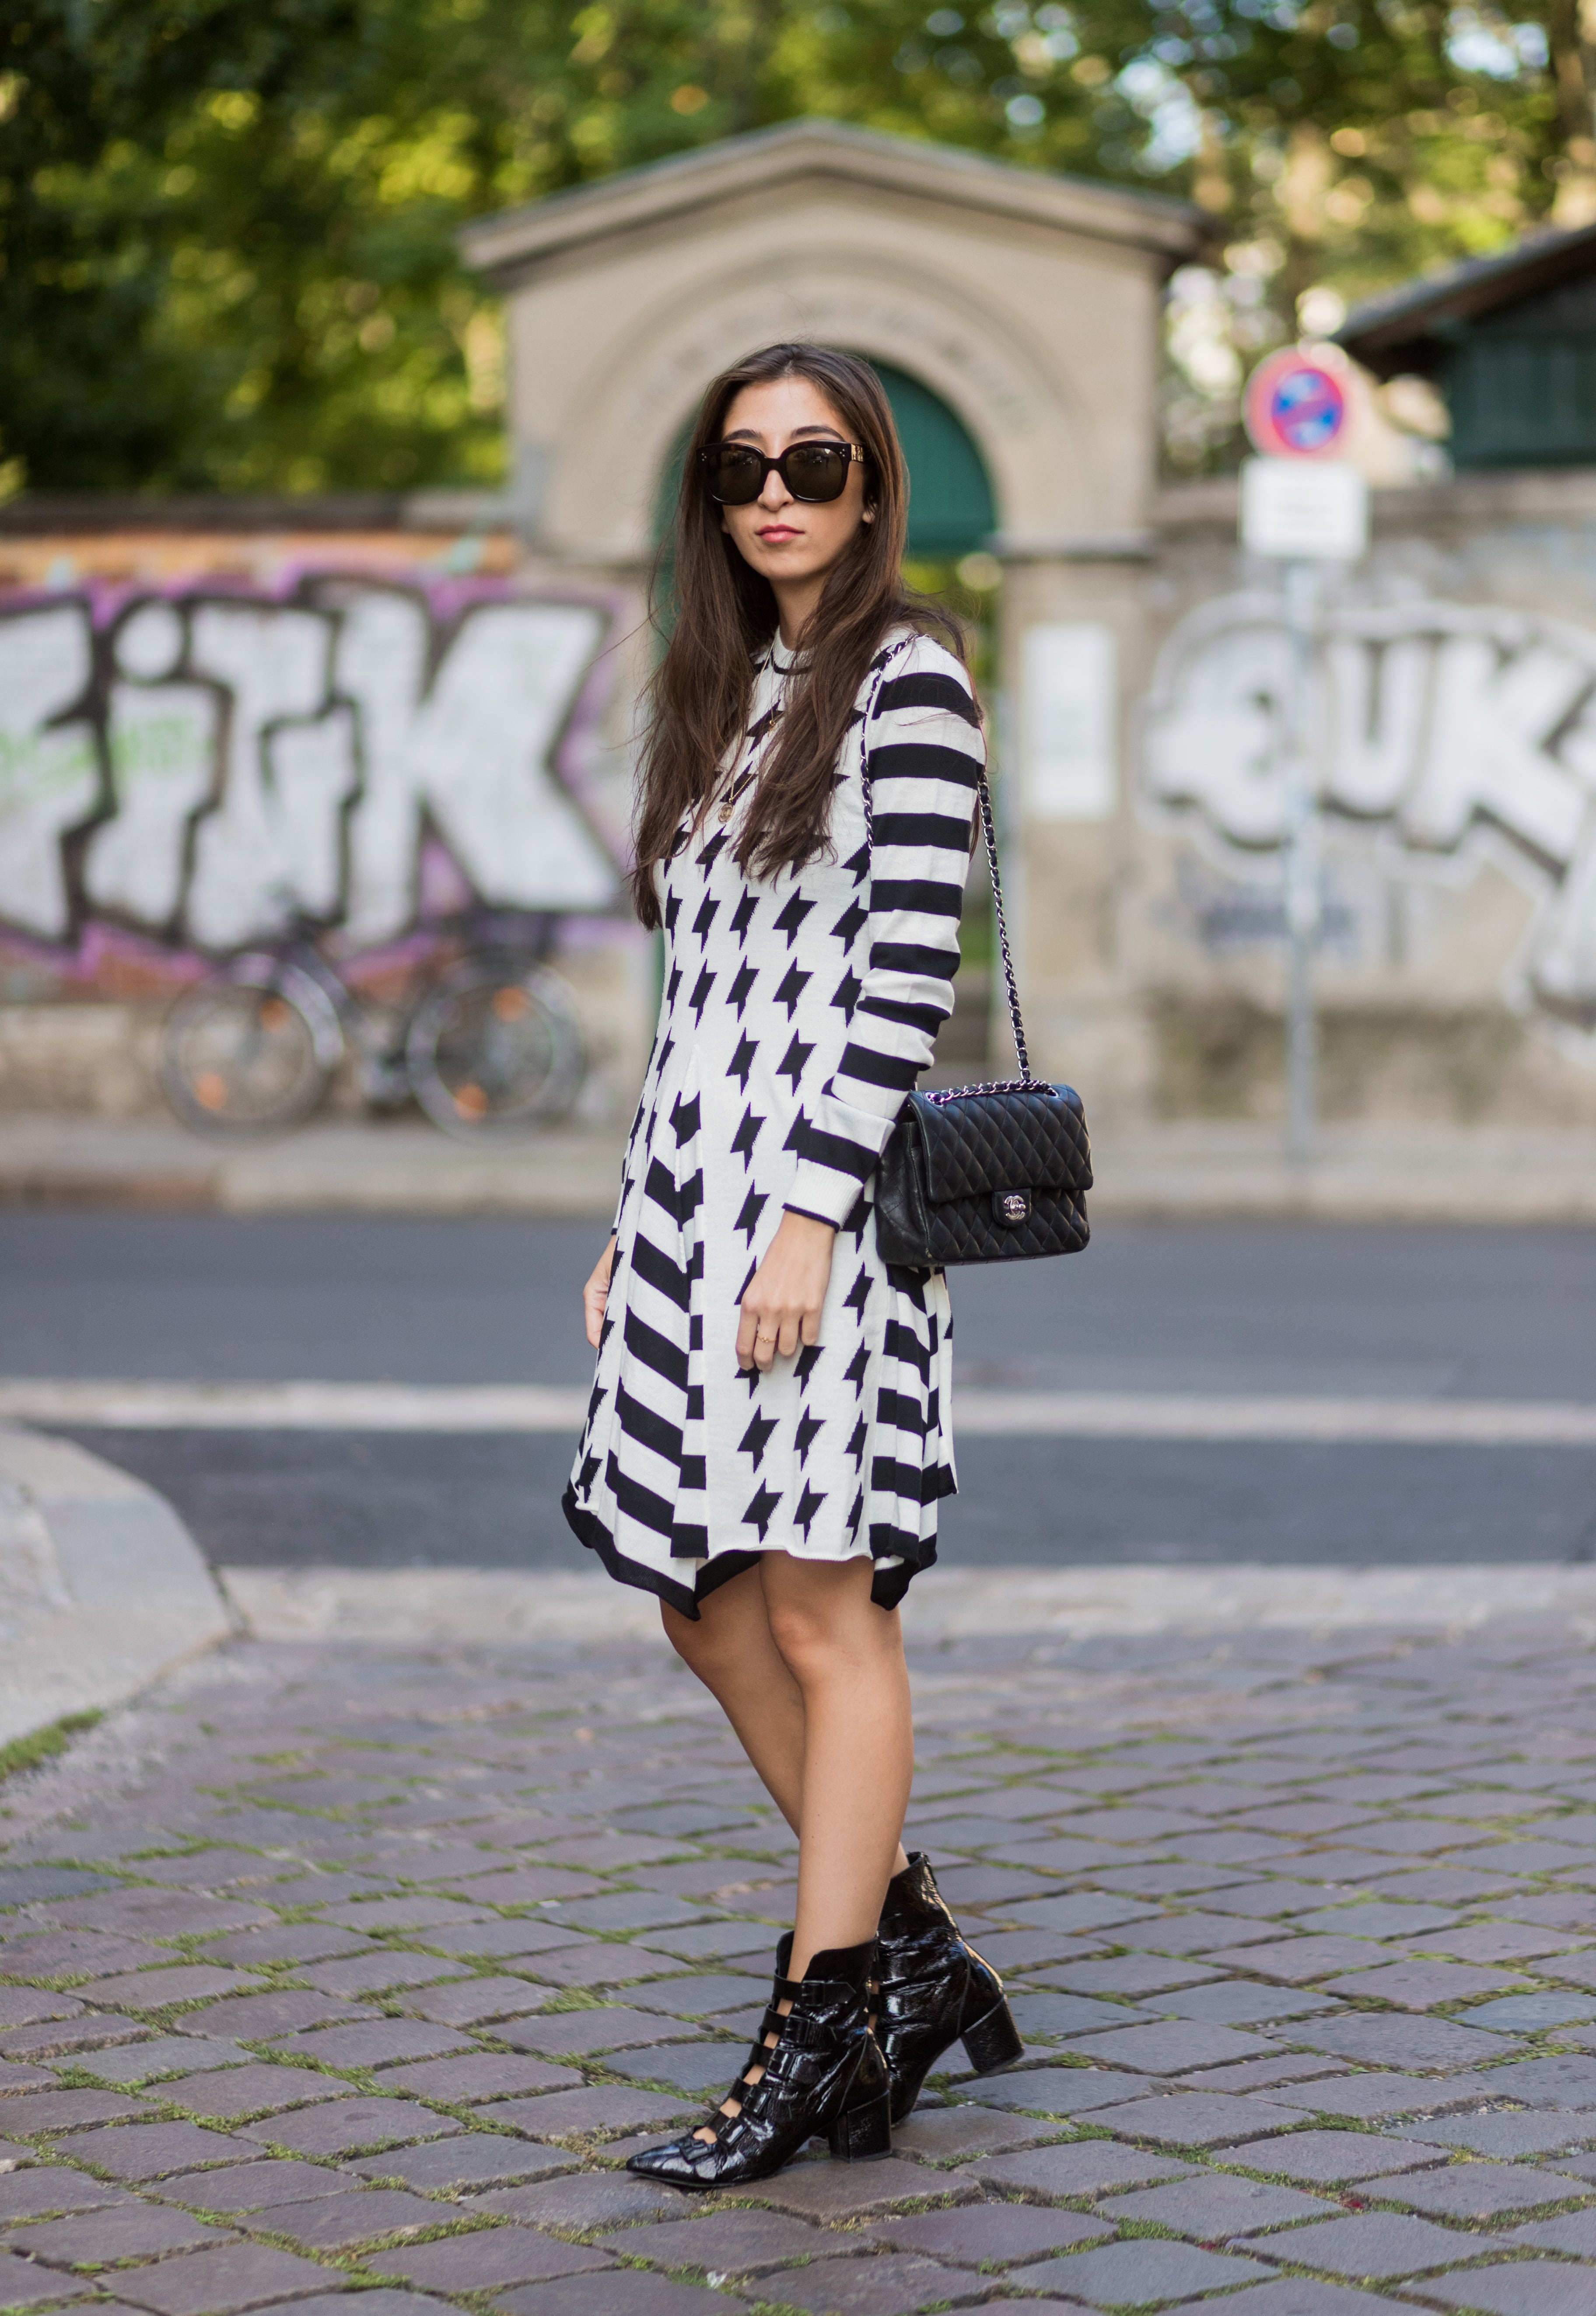 How to Wear Ankle Boots With Dresses